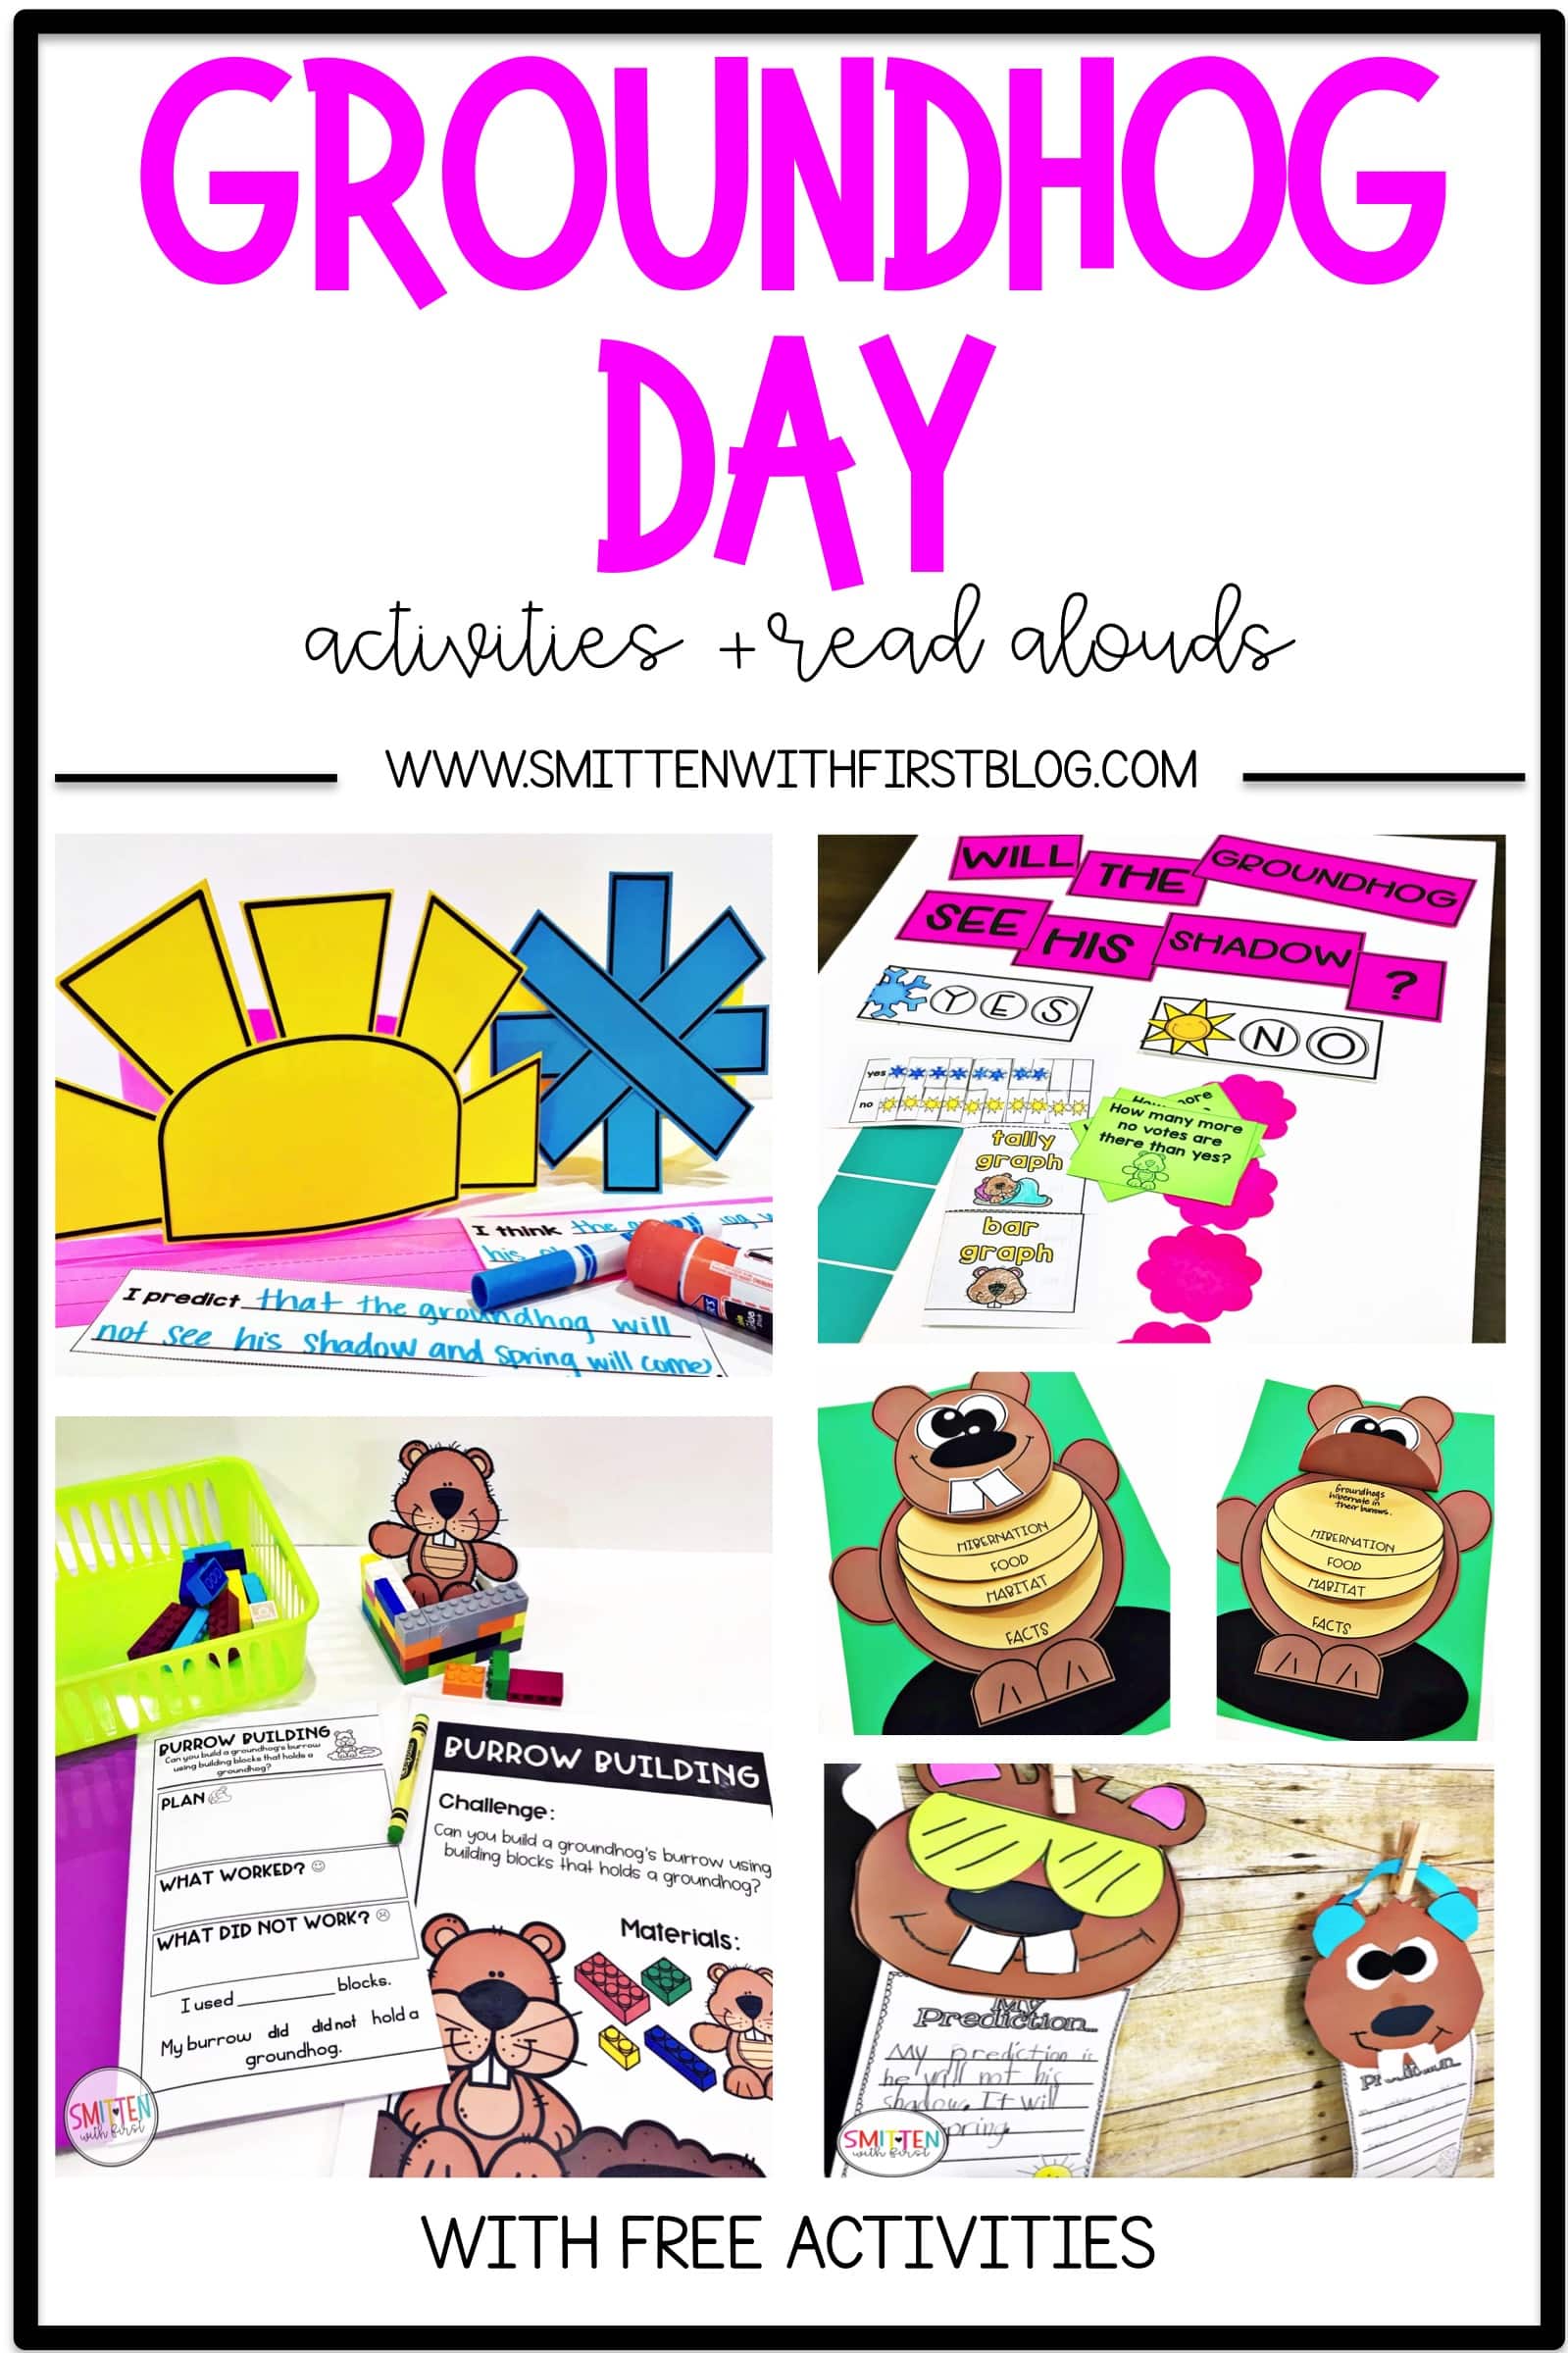 Groundhog Day activities and read alouds